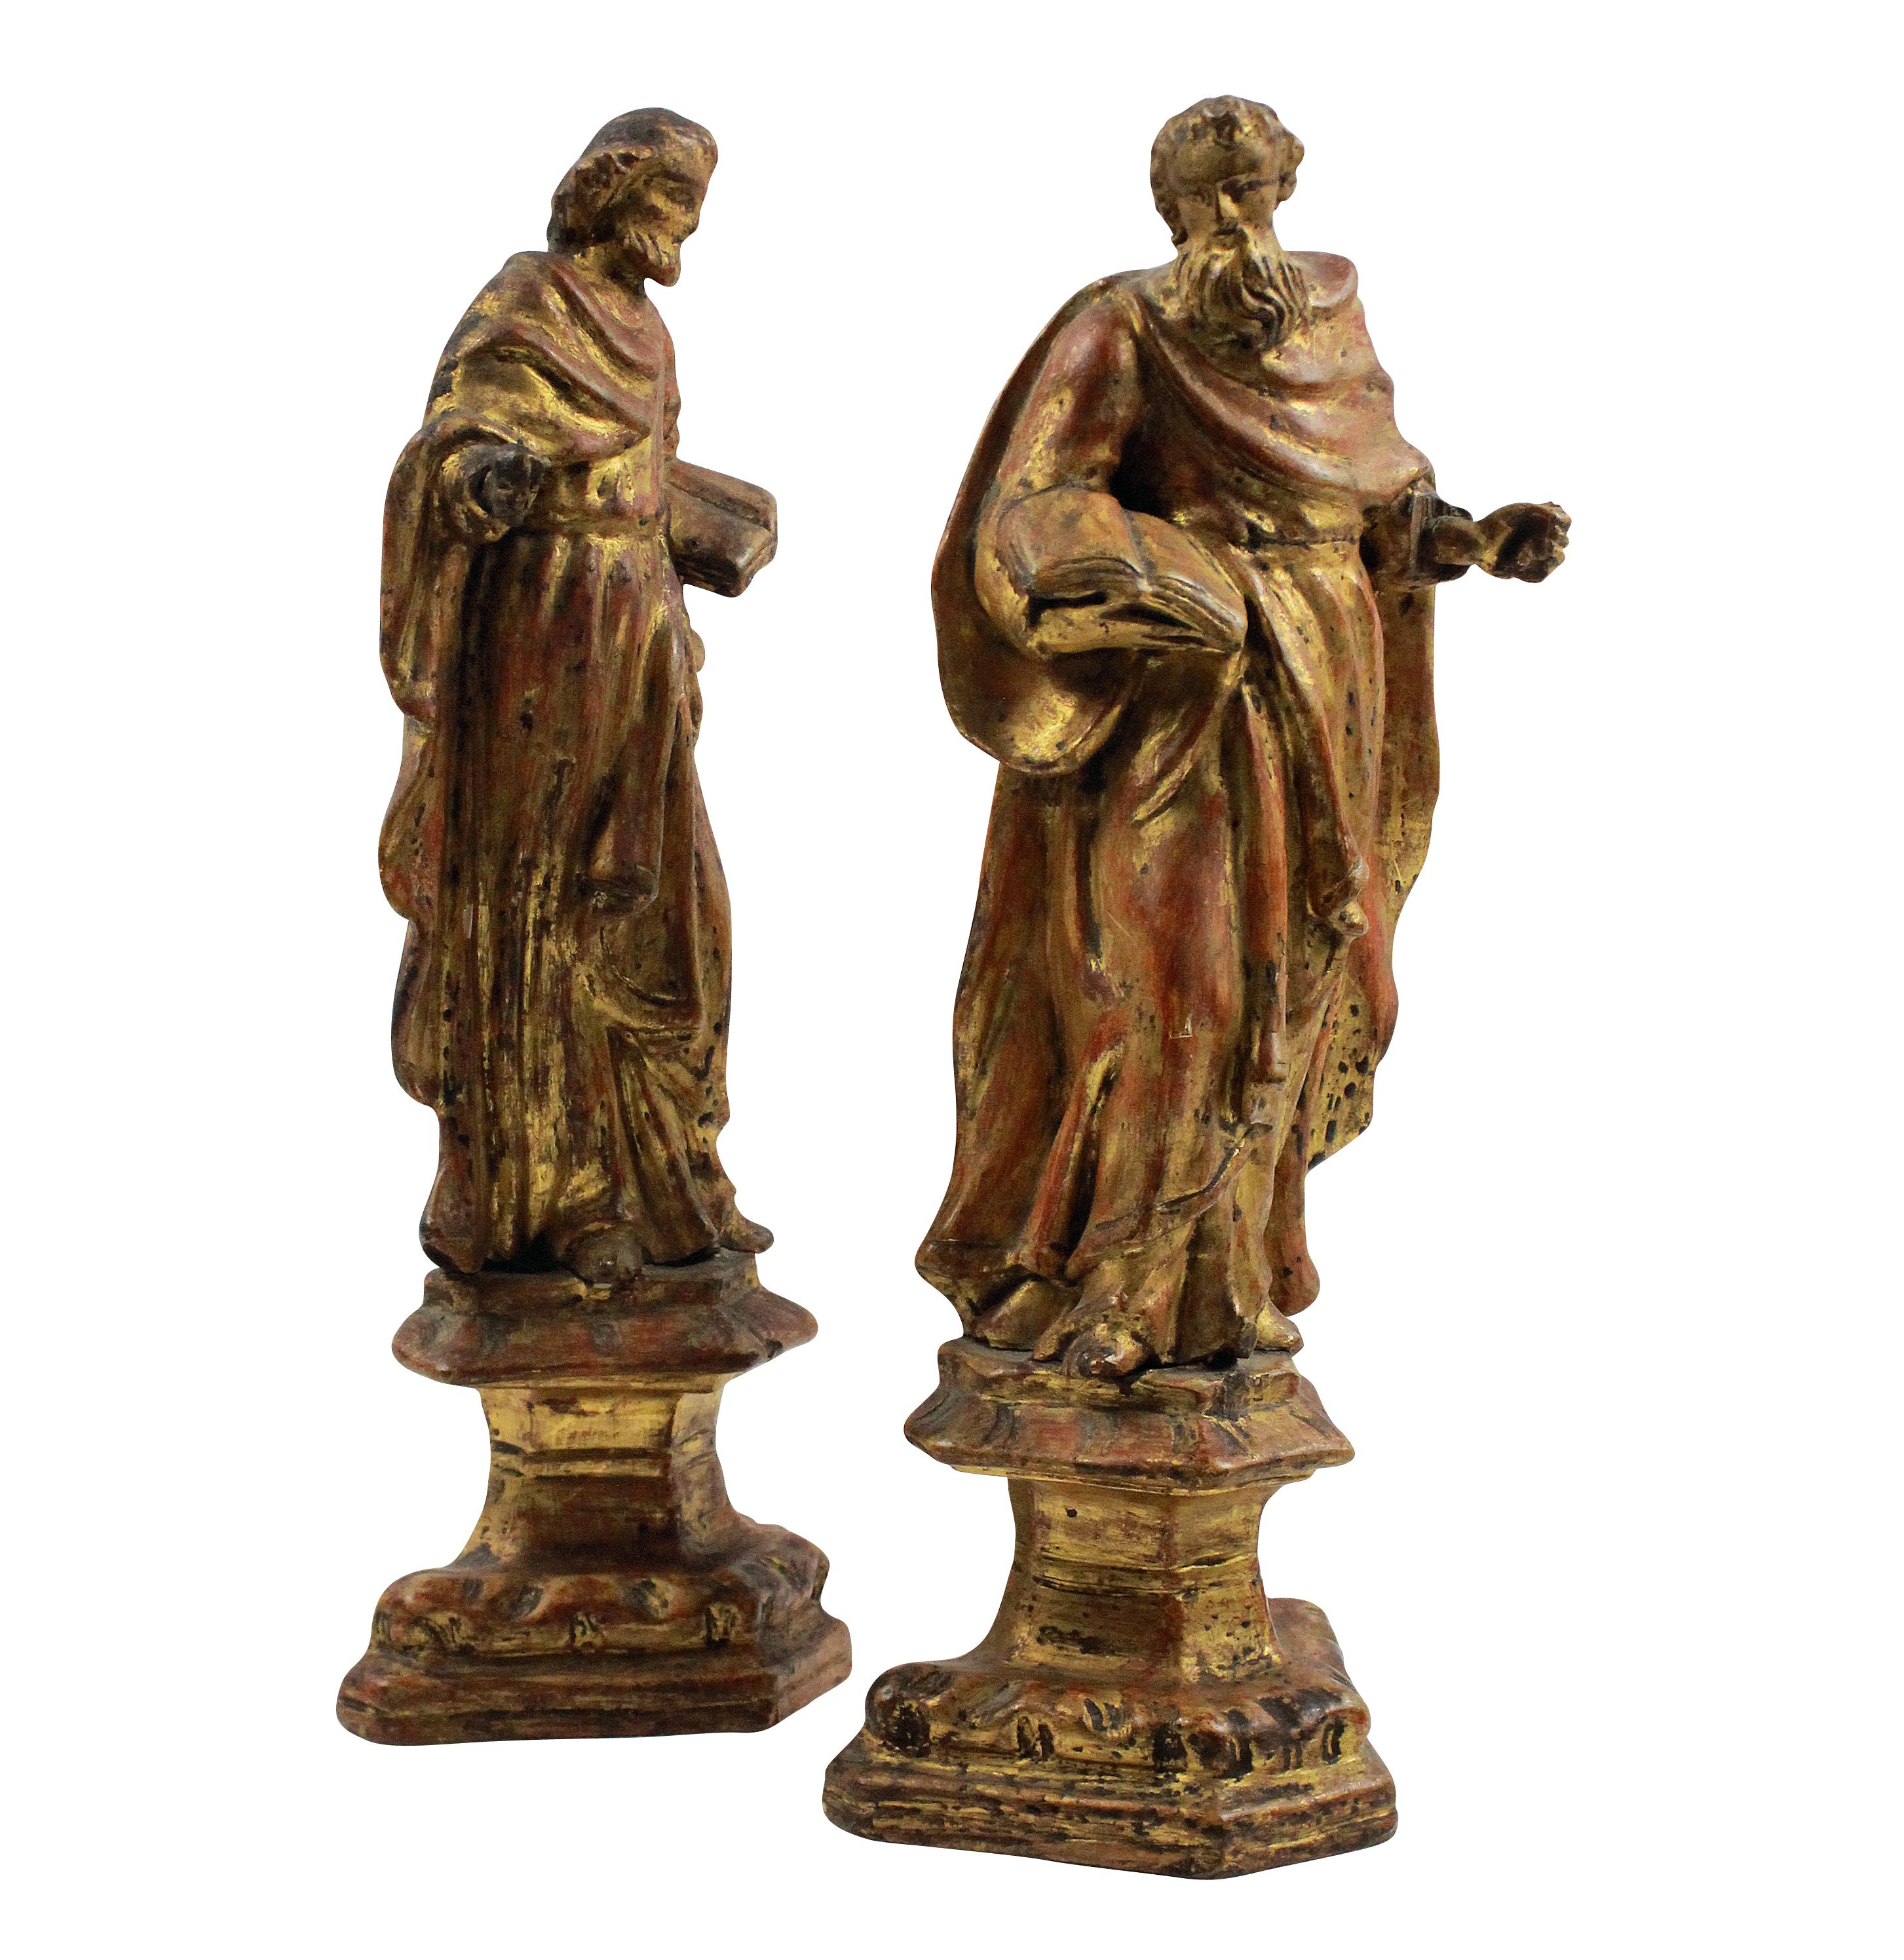 A pair of Italian 18th century giltwood figures of Saints Peter & Paul. In very good condition, apart from Peter having long lost his keys.